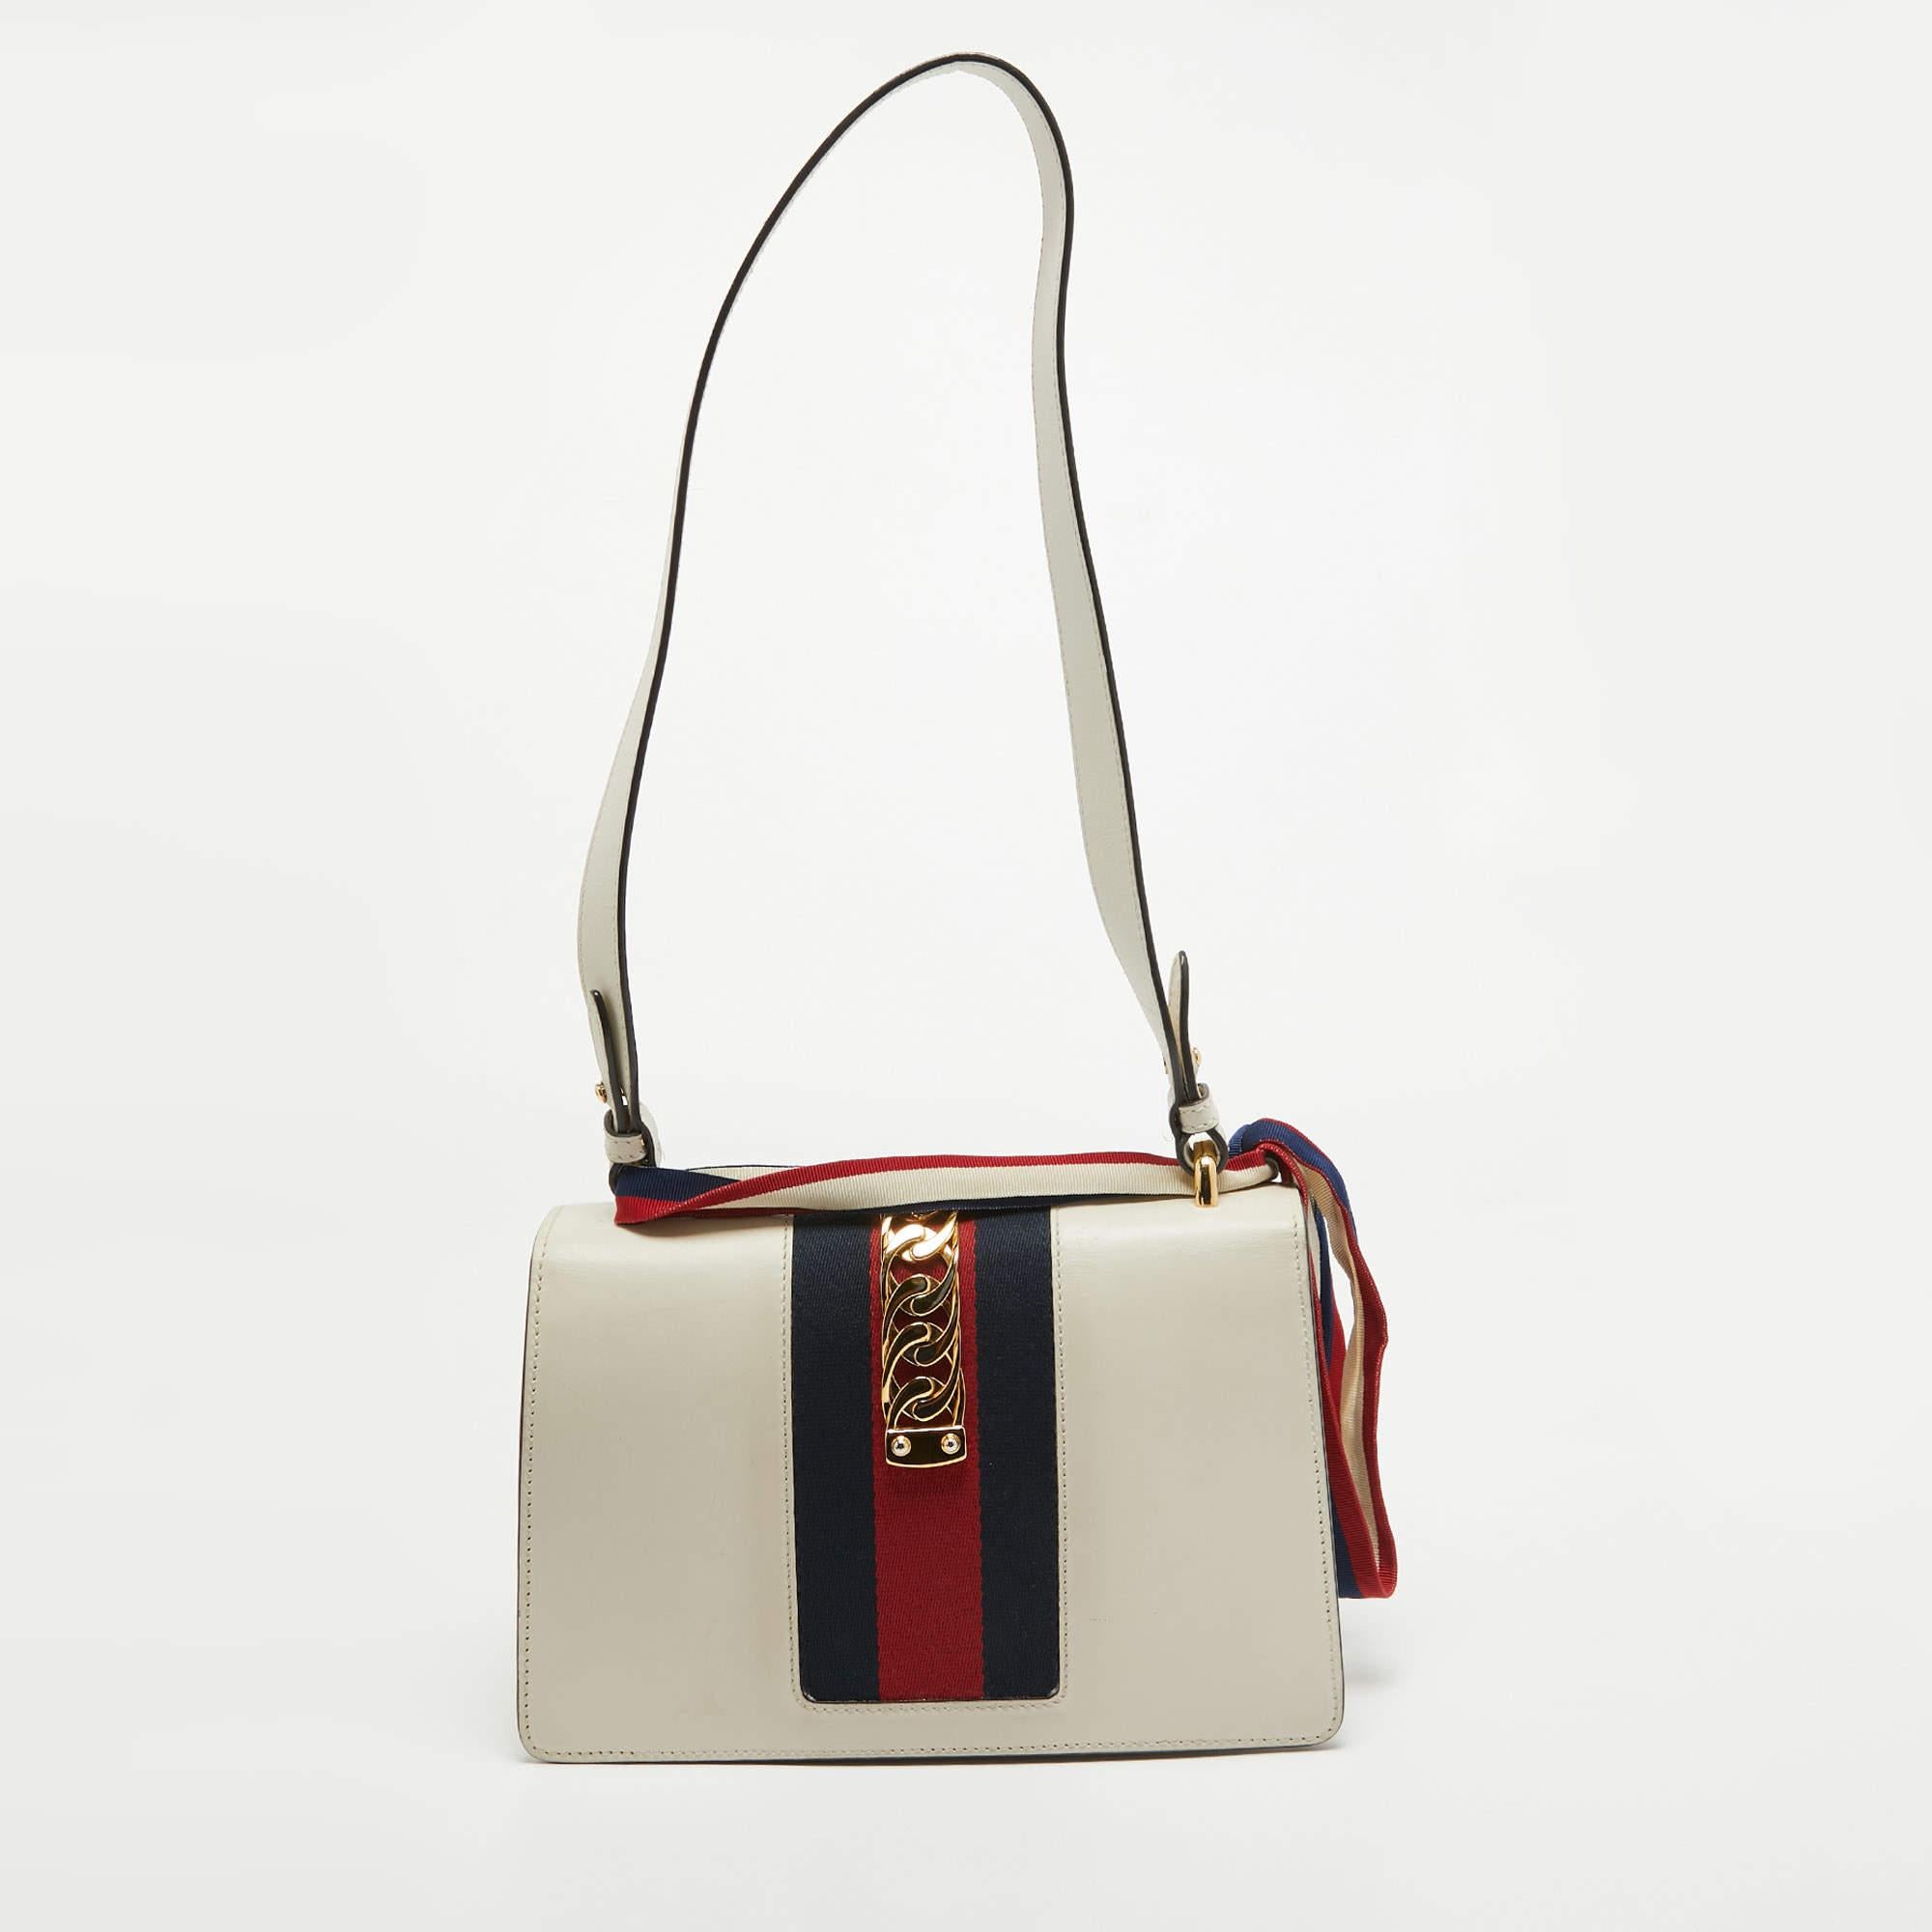 All the designs from Gucci, like this Sylvie bag, reflect a sense of innovation and tradition. Crafted from leather, it is admired for its alluring finish and structured silhouette. The chain shoulder strap makes it practical, and the signature